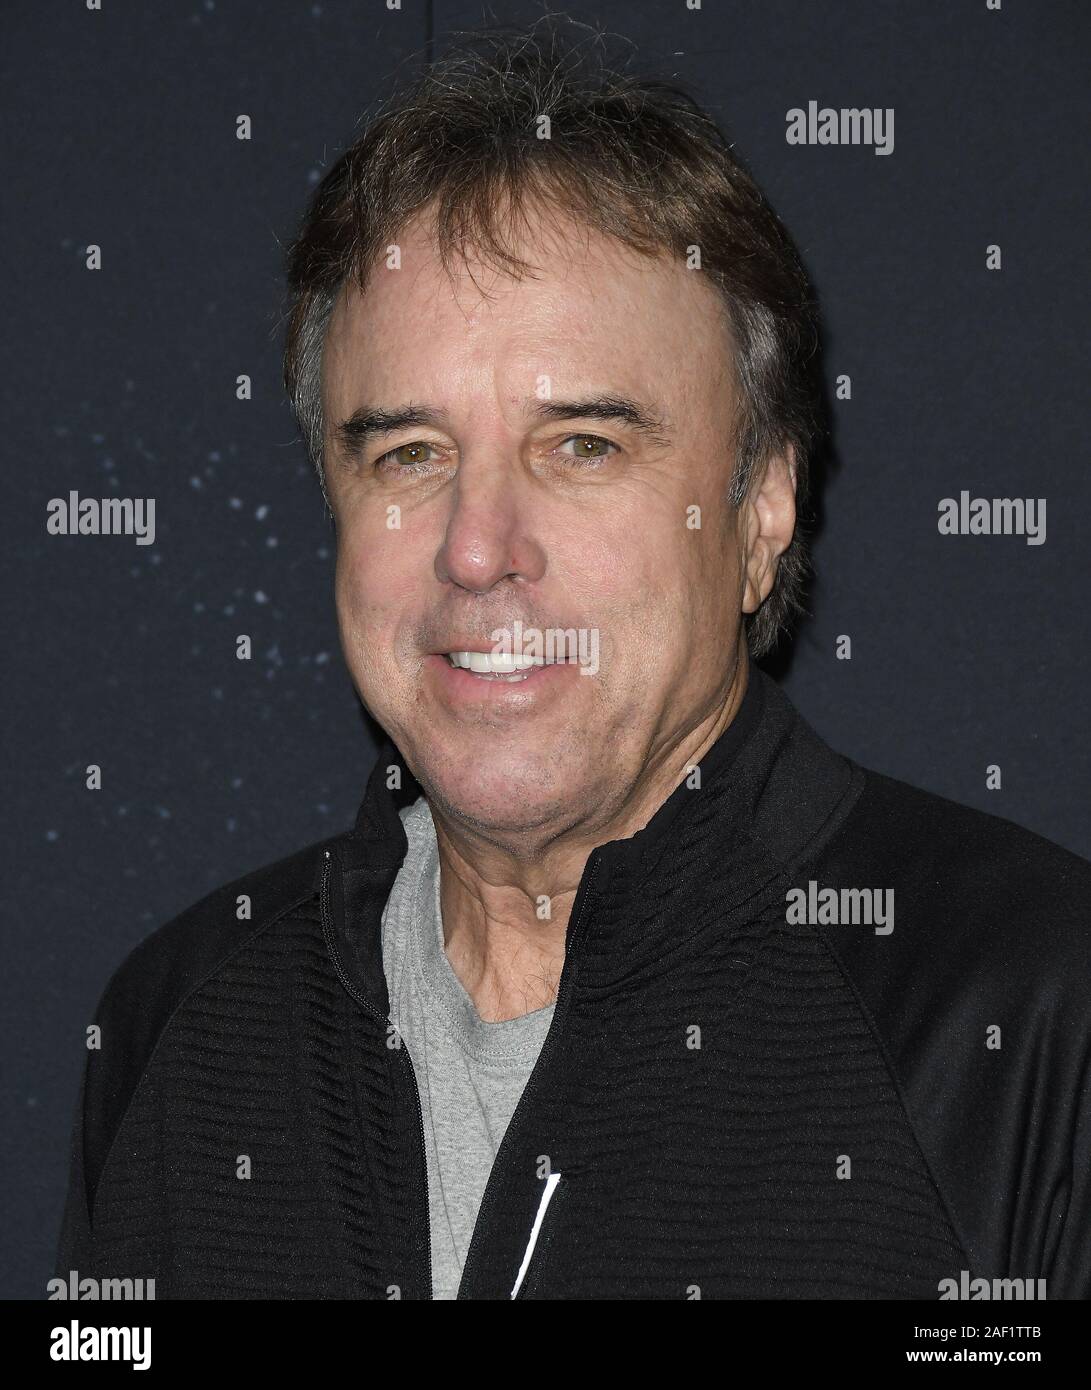 Los Angeles, USA. 11th Dec, 2019. Kevin Nealon arrives at the UNCUT GEMS Los Angeles Premiere held at the ArcLight Cinerama Dome in Los Angeles, CA on Wednesday, ?December 11, 2019. (Photo By Sthanlee B. Mirador/Sipa USA) Credit: Sipa USA/Alamy Live News Stock Photo